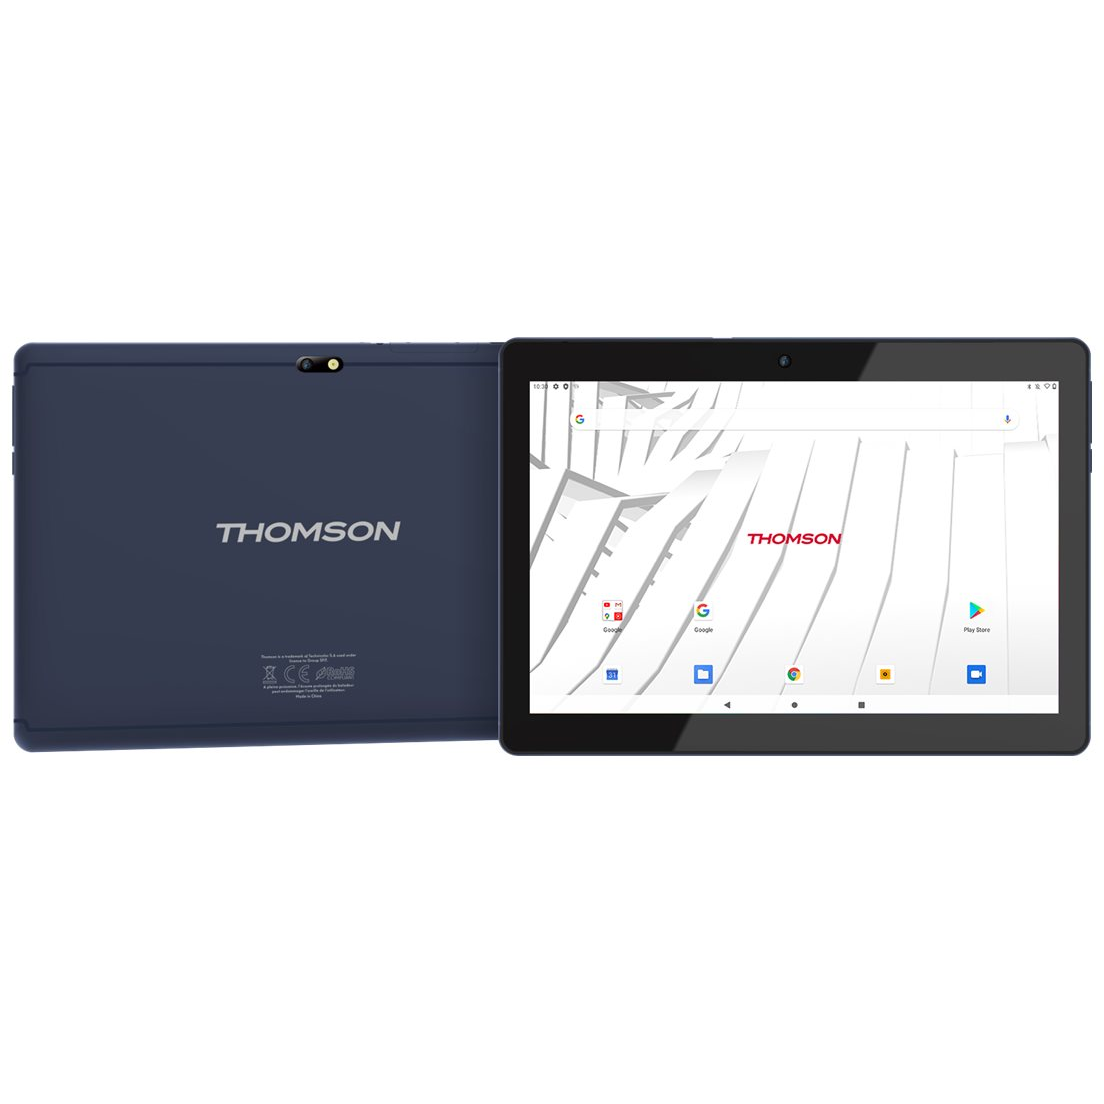 3663792027876 Thomson TEO 10'' IPS, 32GB, WiFi, Android 12, Black - Androi Computer & IT,Tablets,Android tablets 14600016690 TEO10A2BK32P